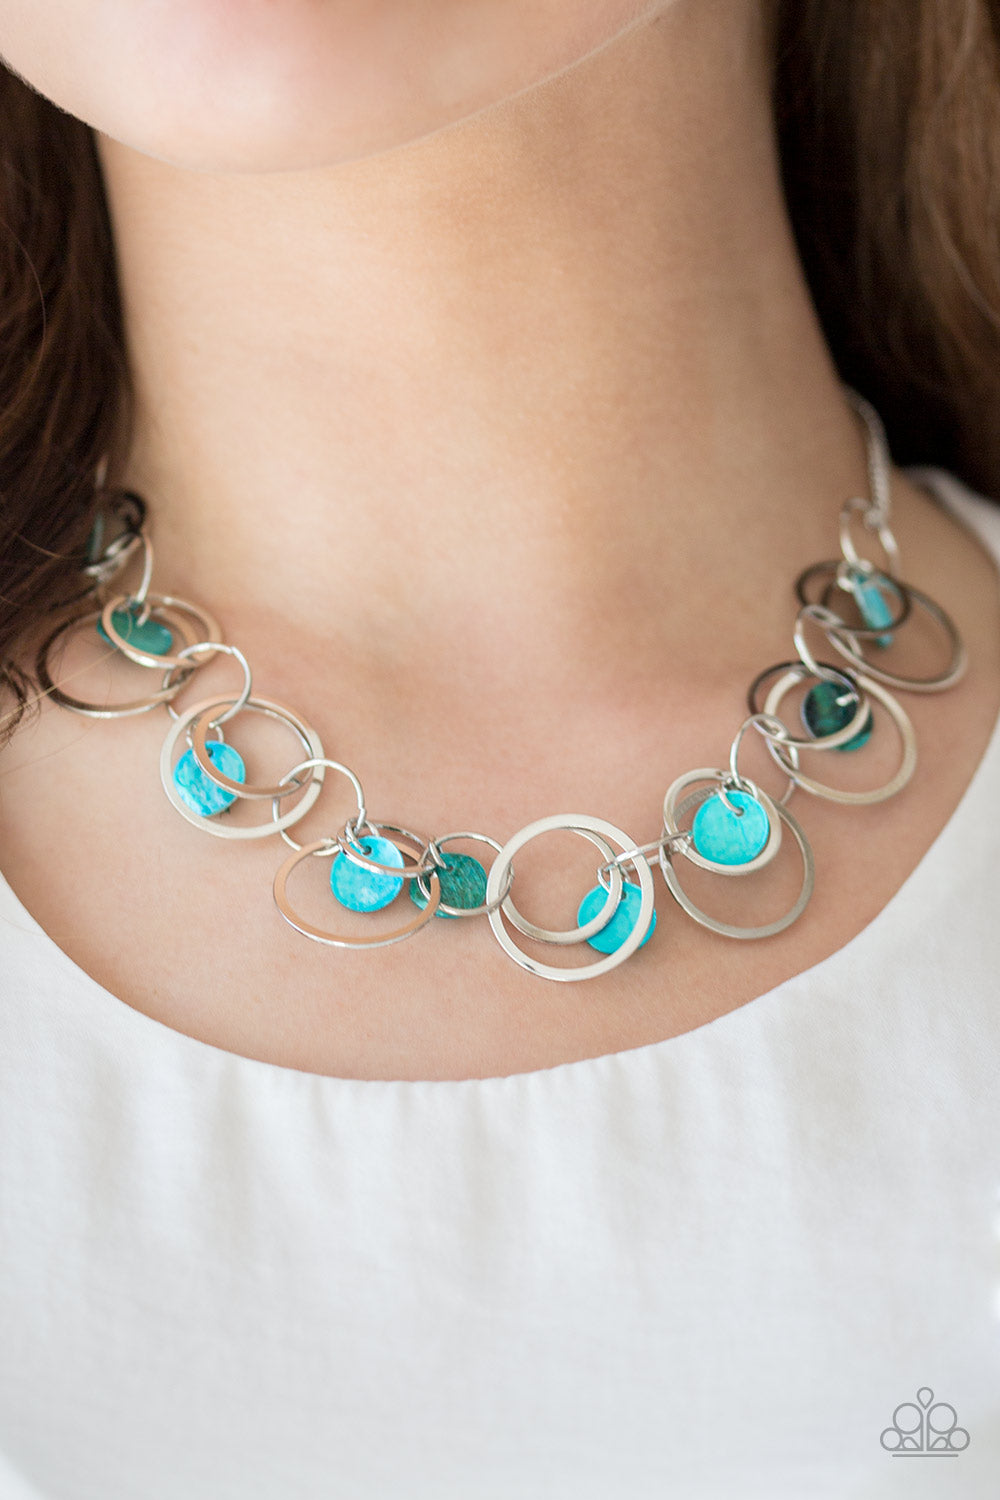 Paparazzi A Hot SHELL-er - Blue - Necklace & Earrings - $5 Jewelry With Ashley Swint